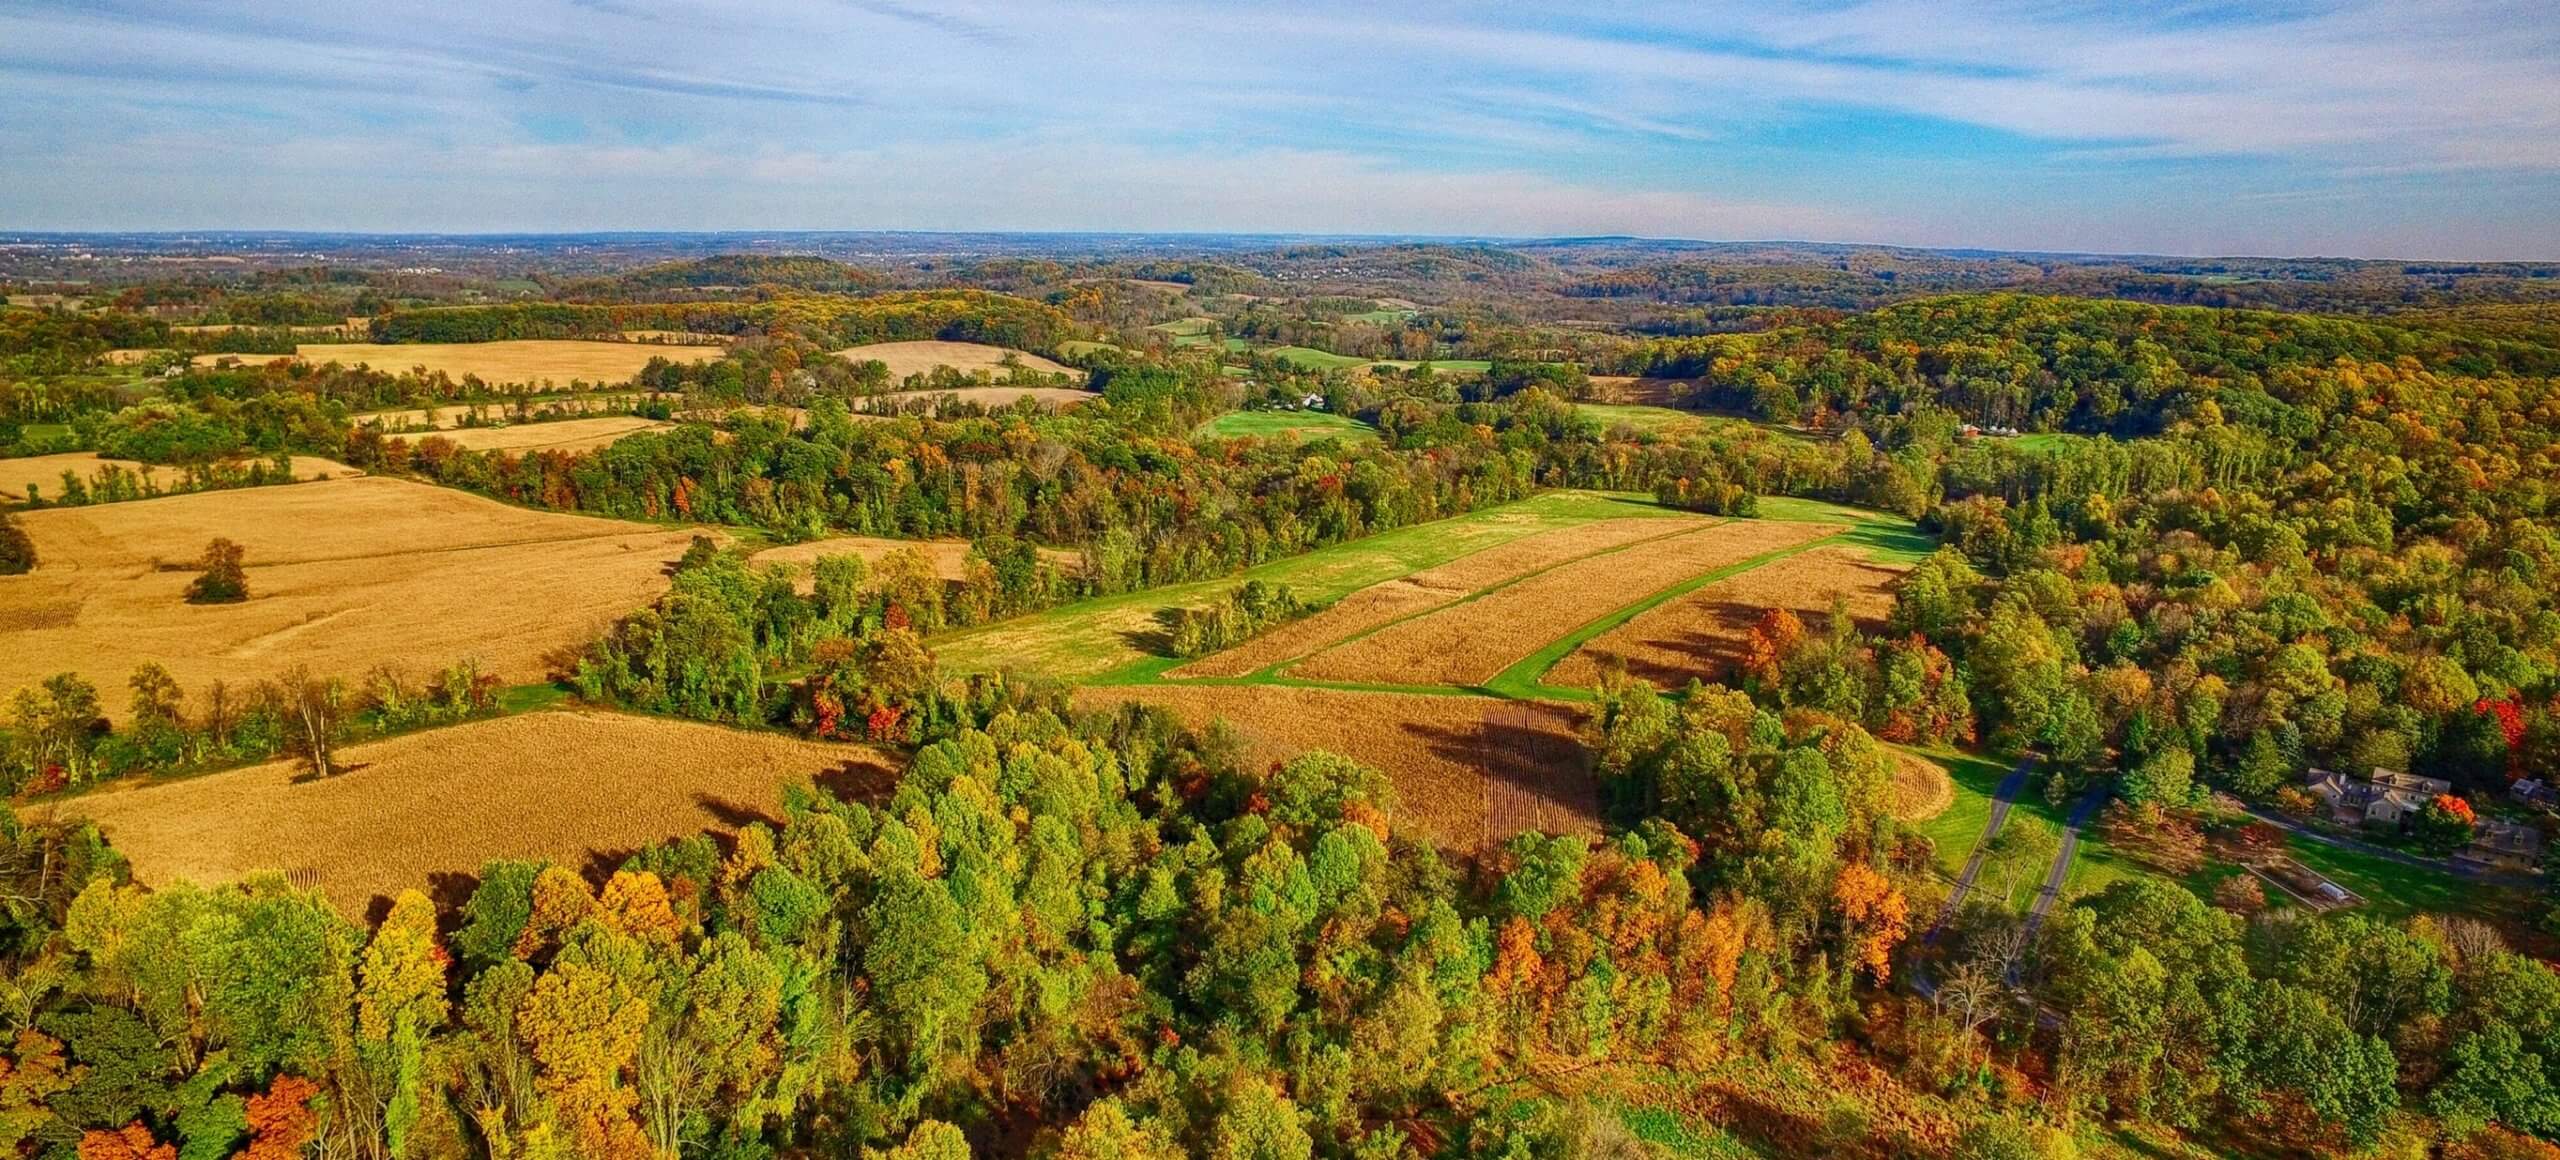 A drone photo of a natural autumn landscape of farm feilds and trees under a blue sky with whispy white clouds.